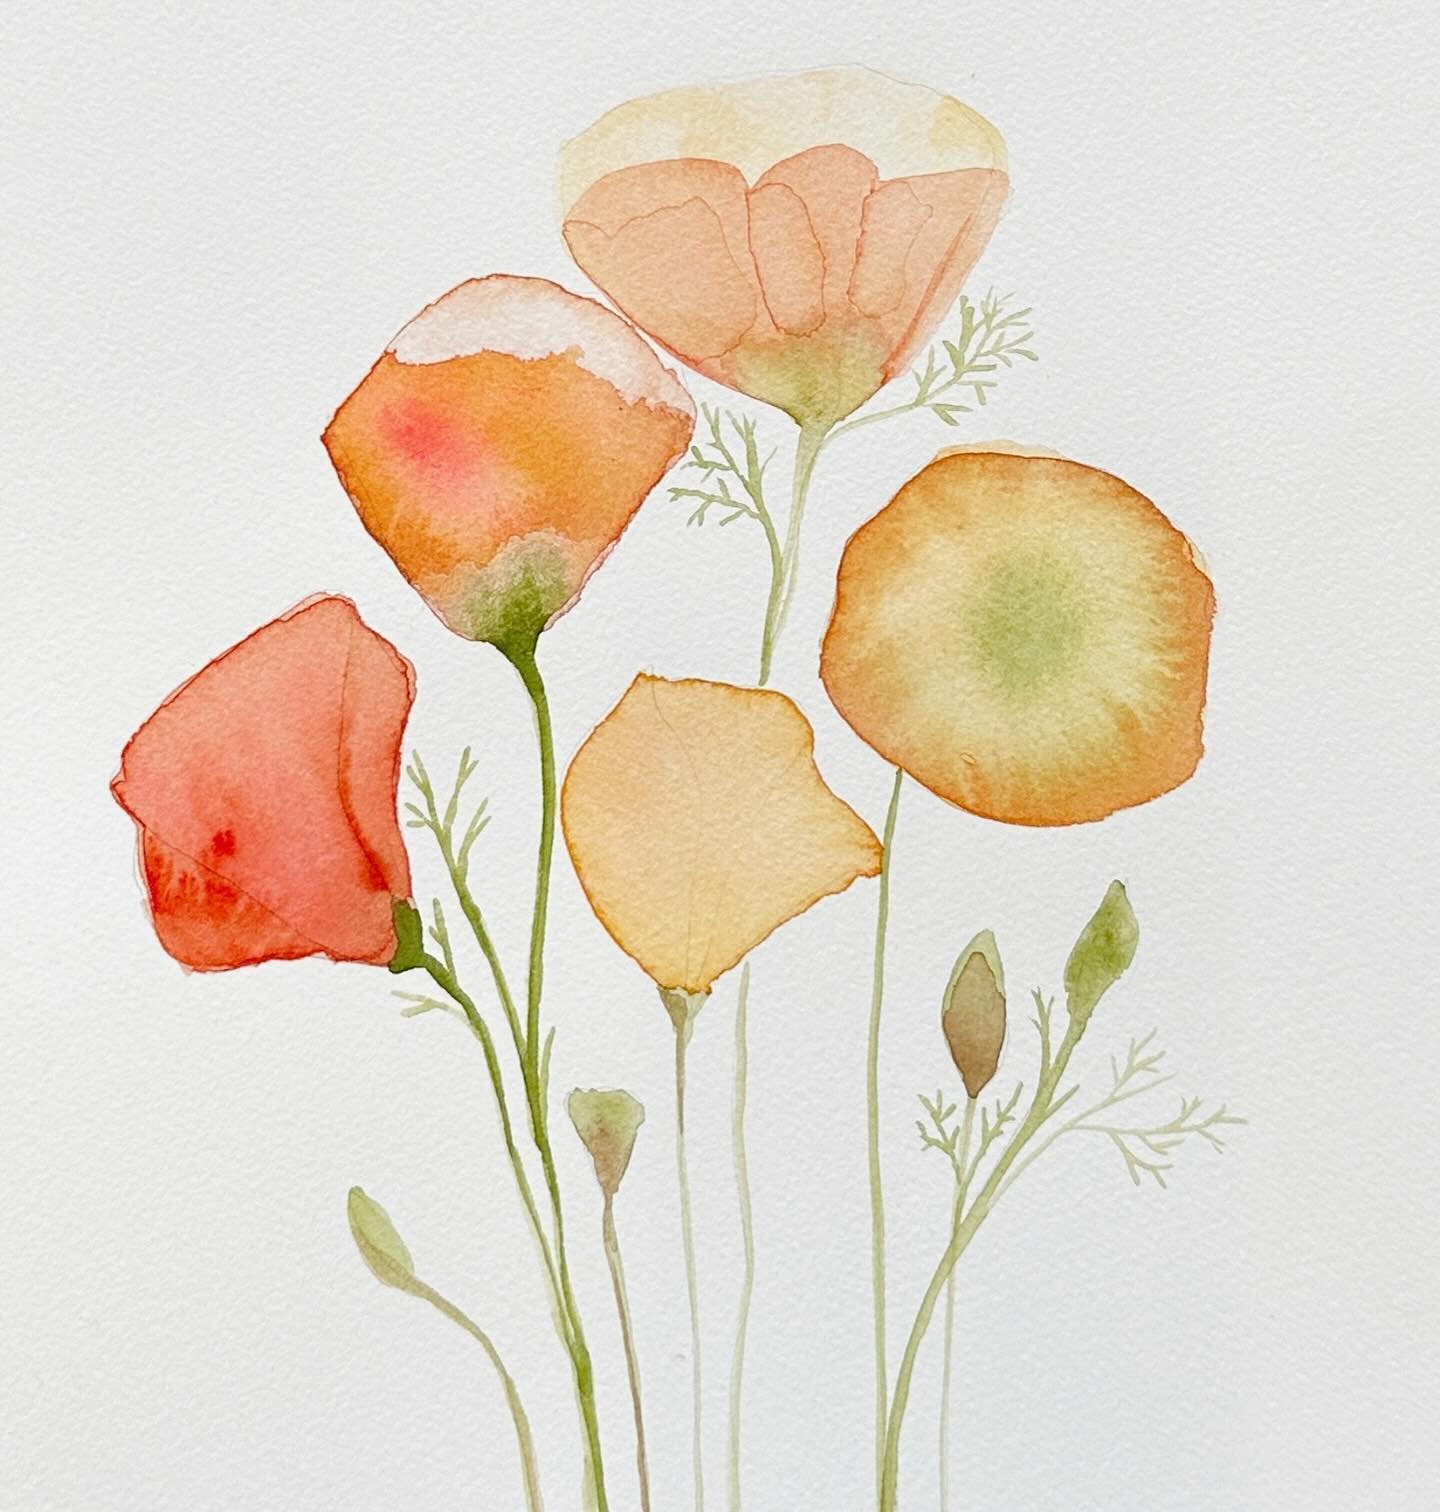 Back in the studio after our short trip to California and painting poppies&hellip;.. 🧡#creativeprocess 
.
.
.
.
#watercolorartist #poppies #californiapoppies #watercolor #aquarelle #acuarela #artistbrain #flowers #flowers #flowerlove #orange#jennysc